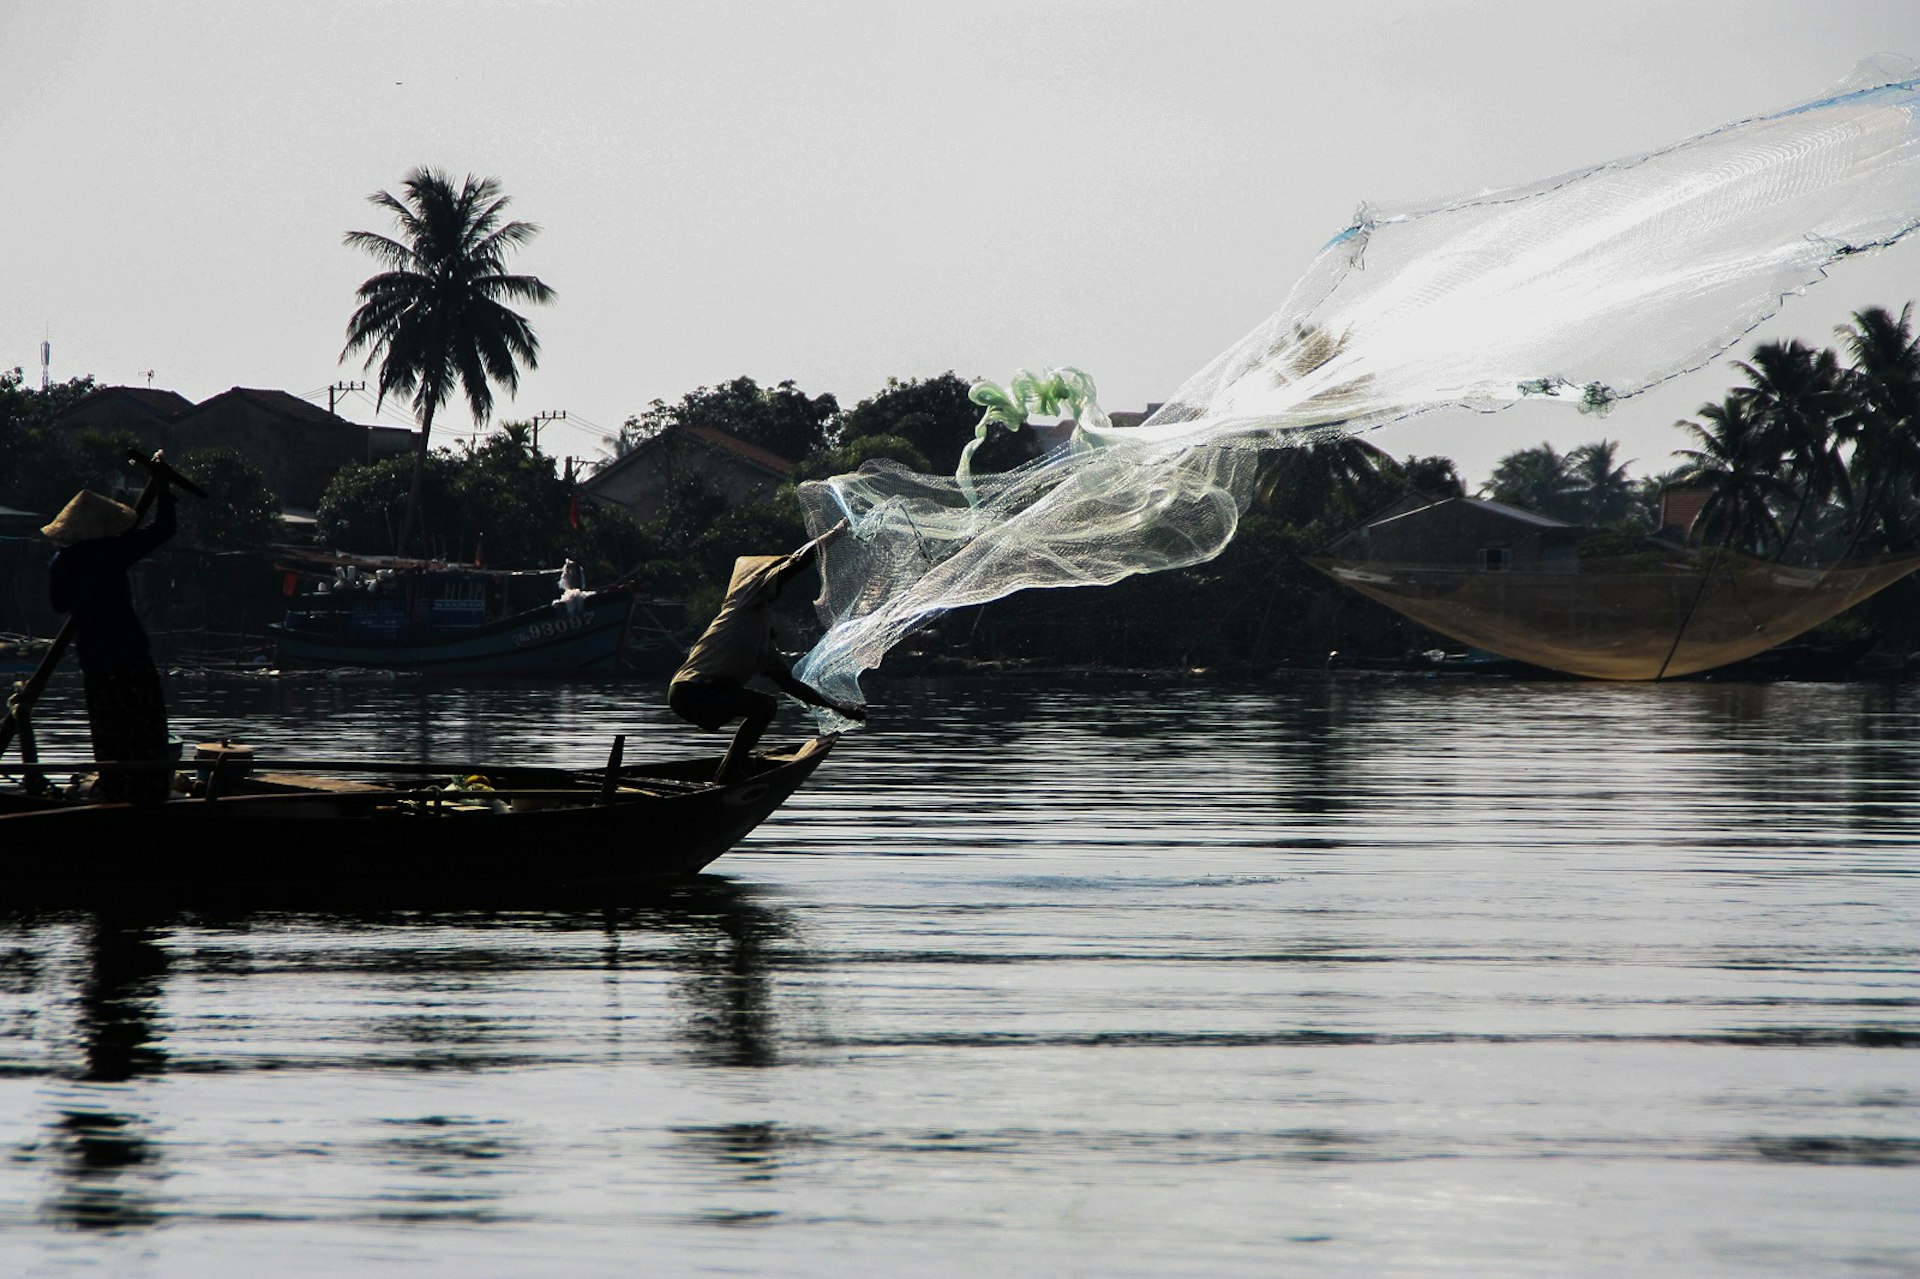 A fisher throws a large fishing net from the end of a small wooden boat in the middle of the river. There are palm trees silhouetted against the grey sky in the background.